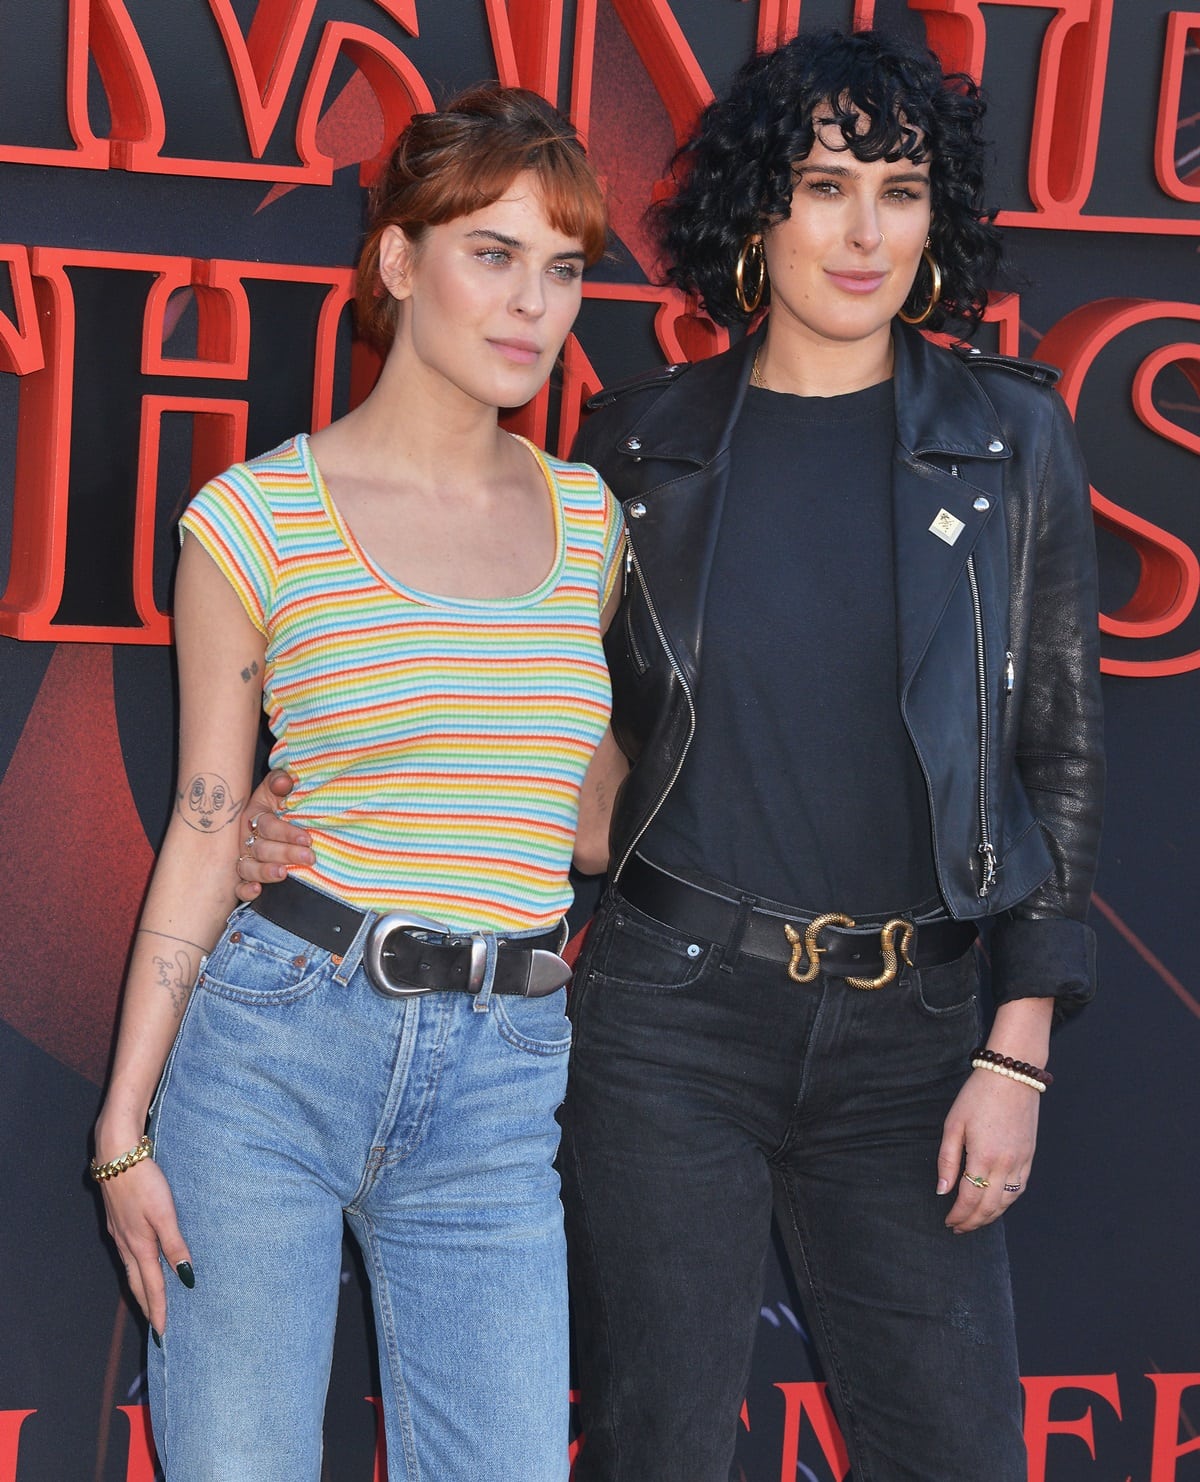 How Tall is Rumer Willis? Actress Towers Over Average American Woman